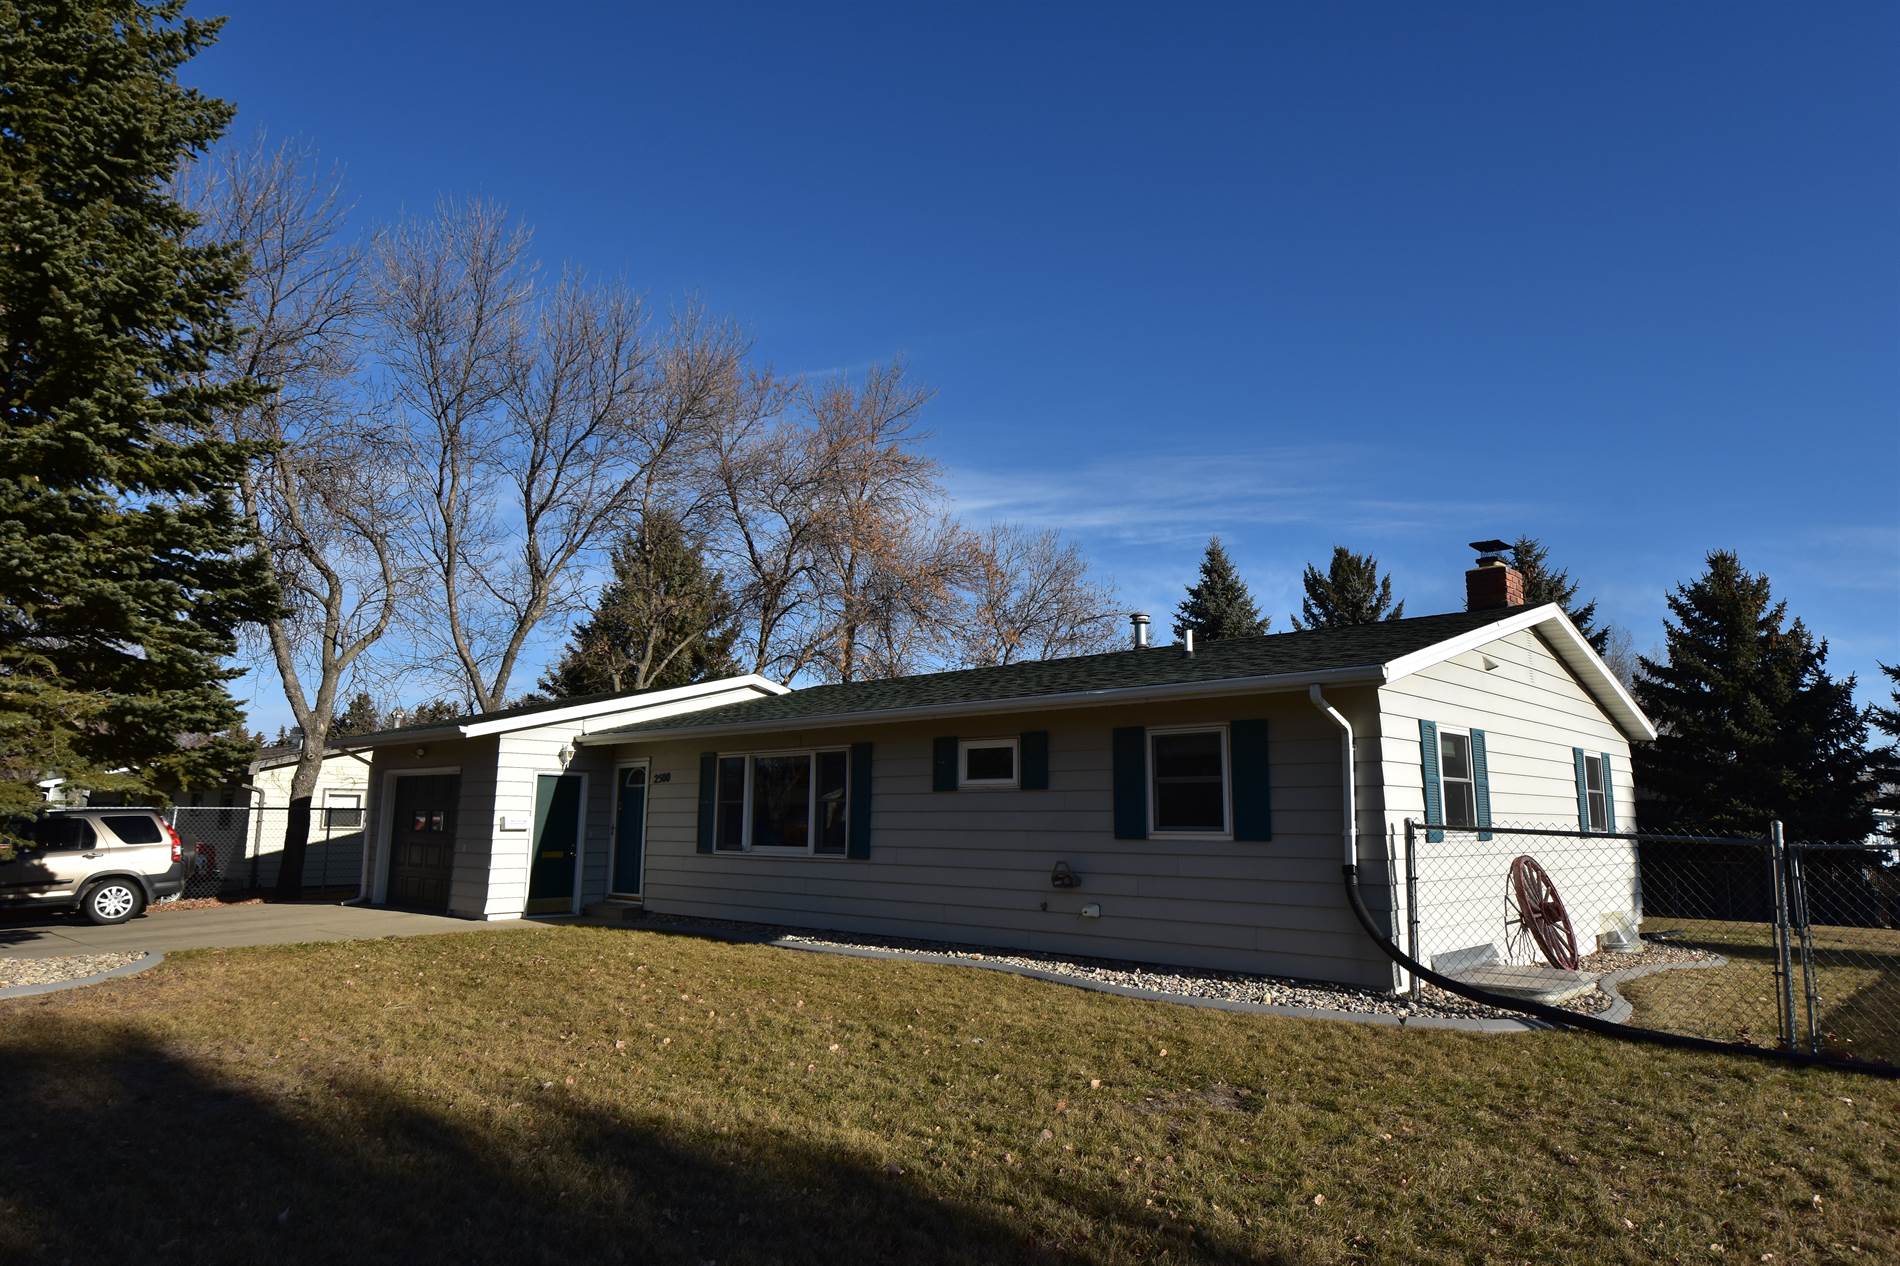 2500 8th ST NW, Minot, ND 58703